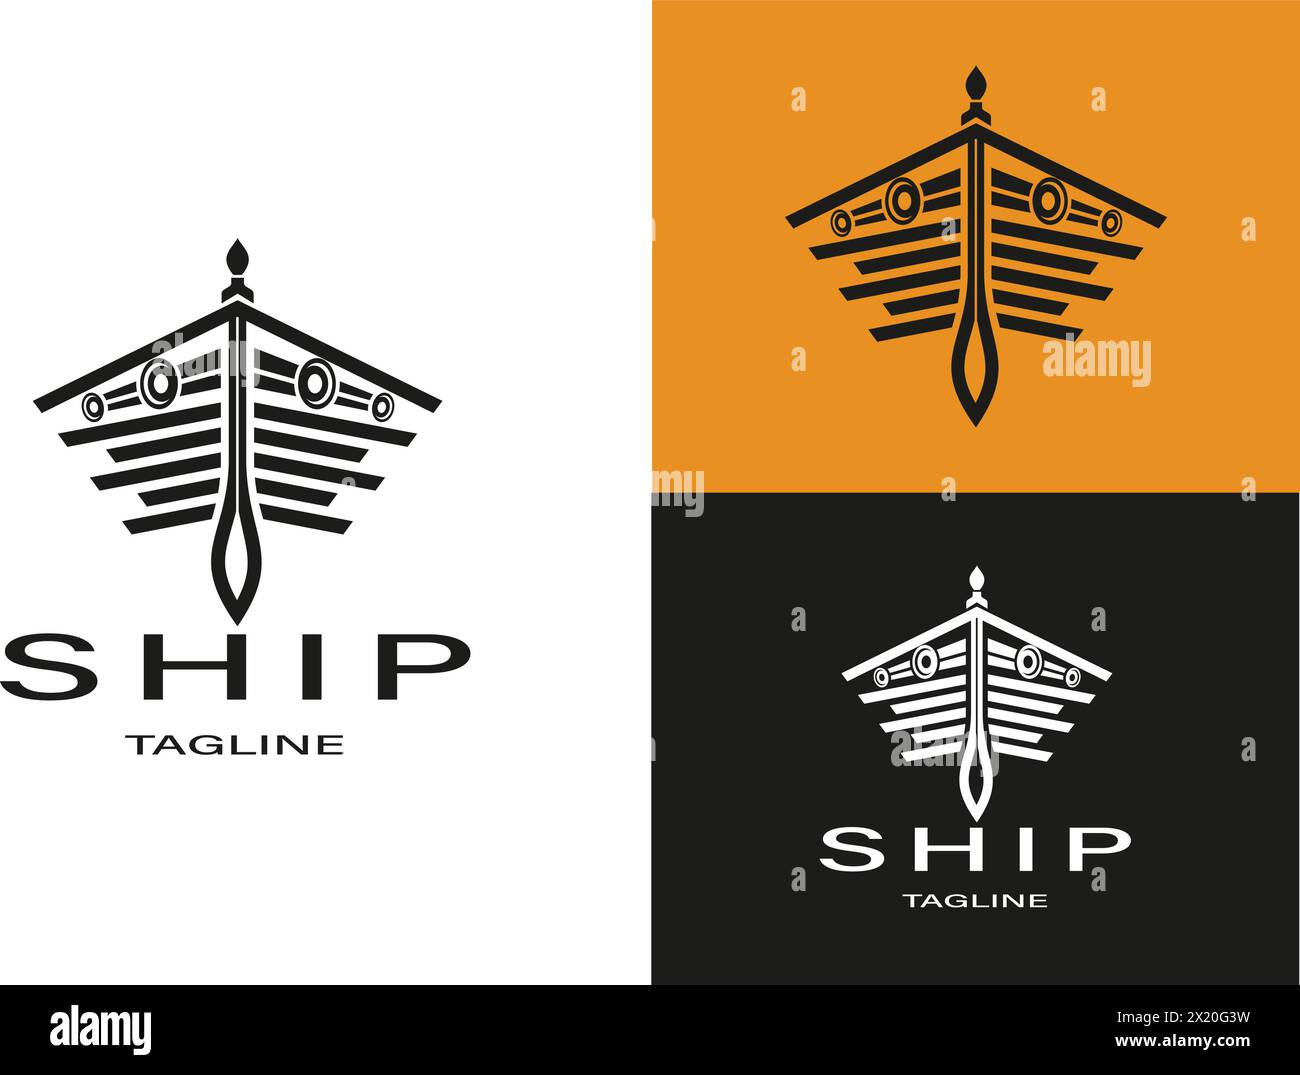 Illustration of the front view of a ship, symbol, ship design icon Stock Vector